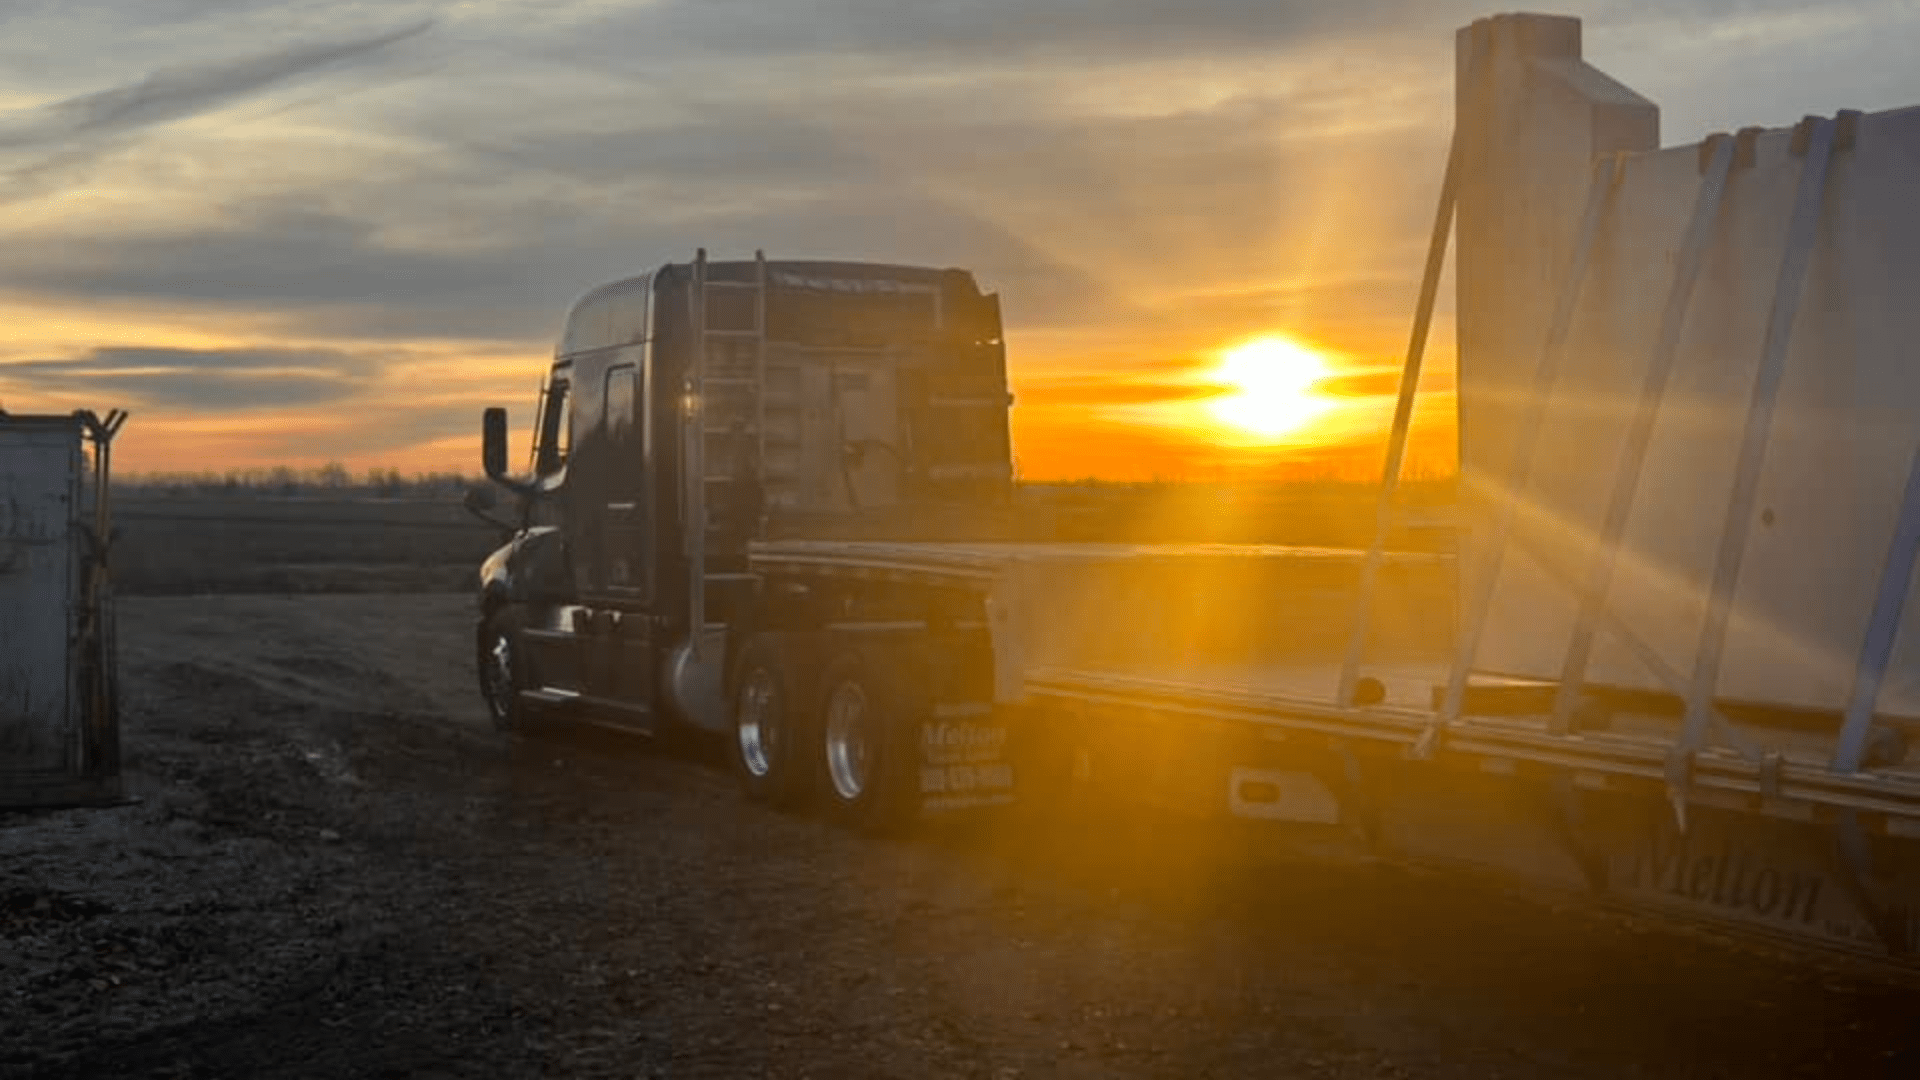 Melton truck driving into the sunset